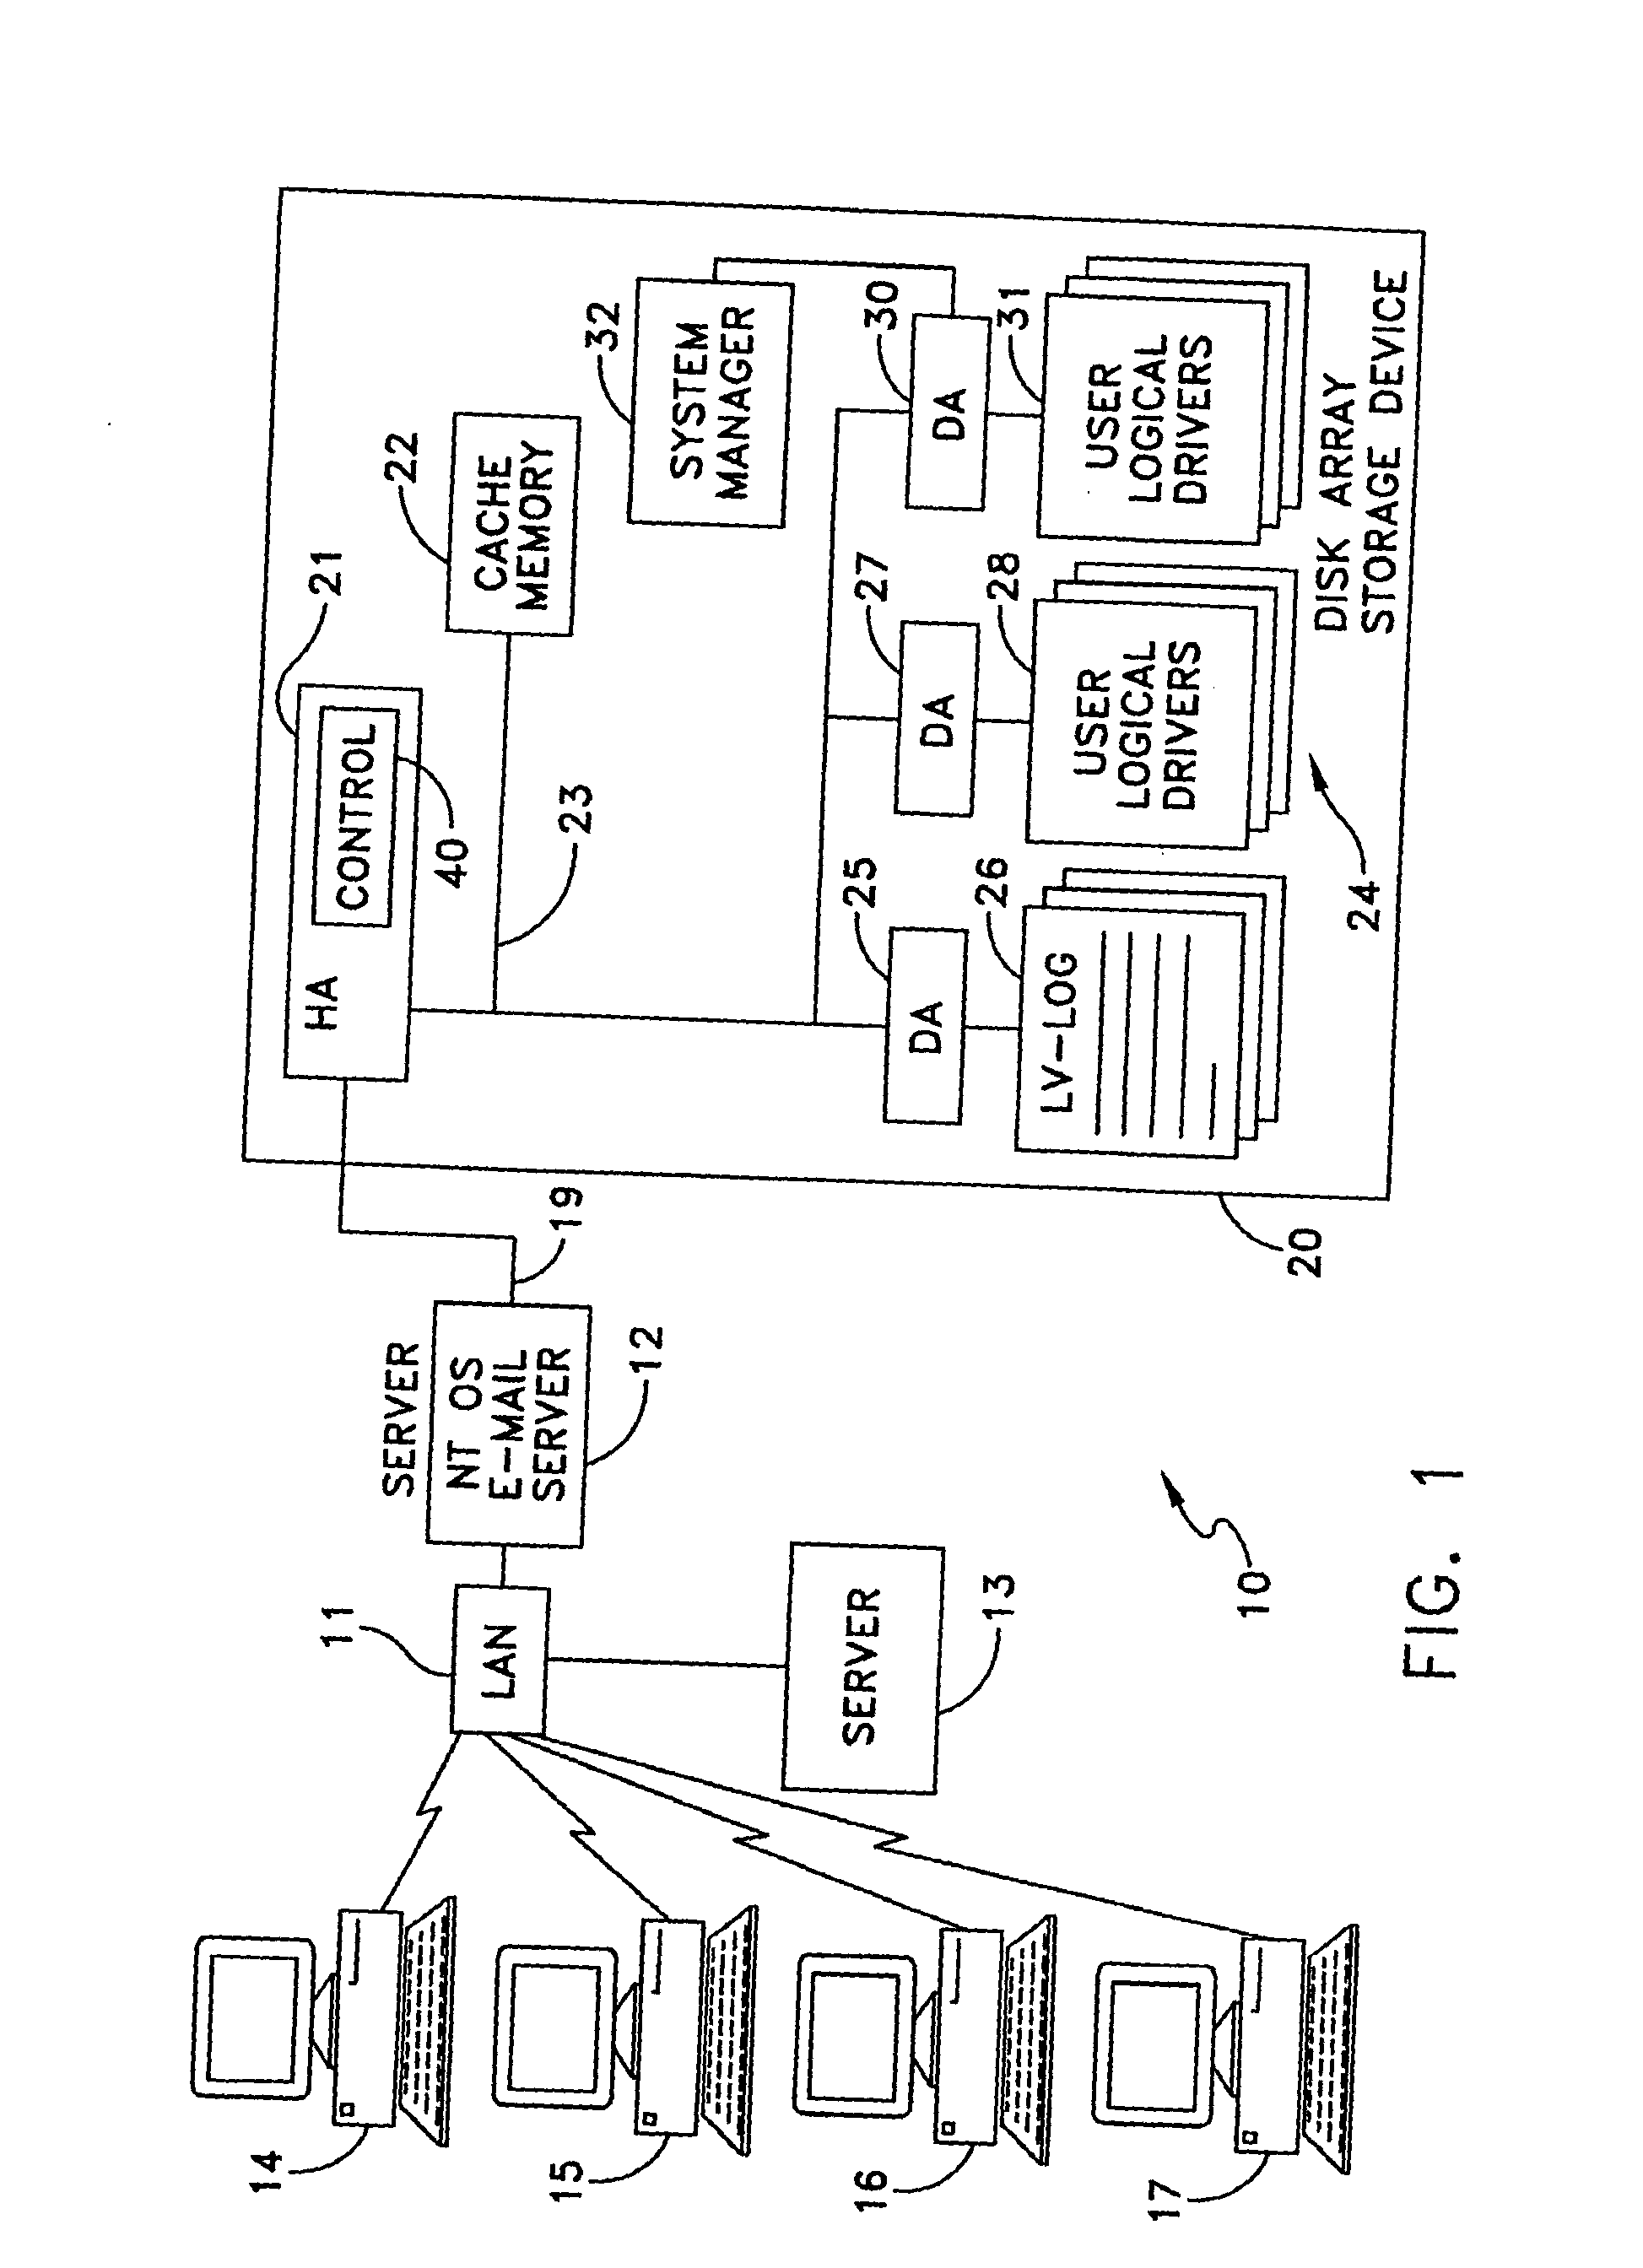 Disk array storage device with means for enhancing host application performance using task priorities